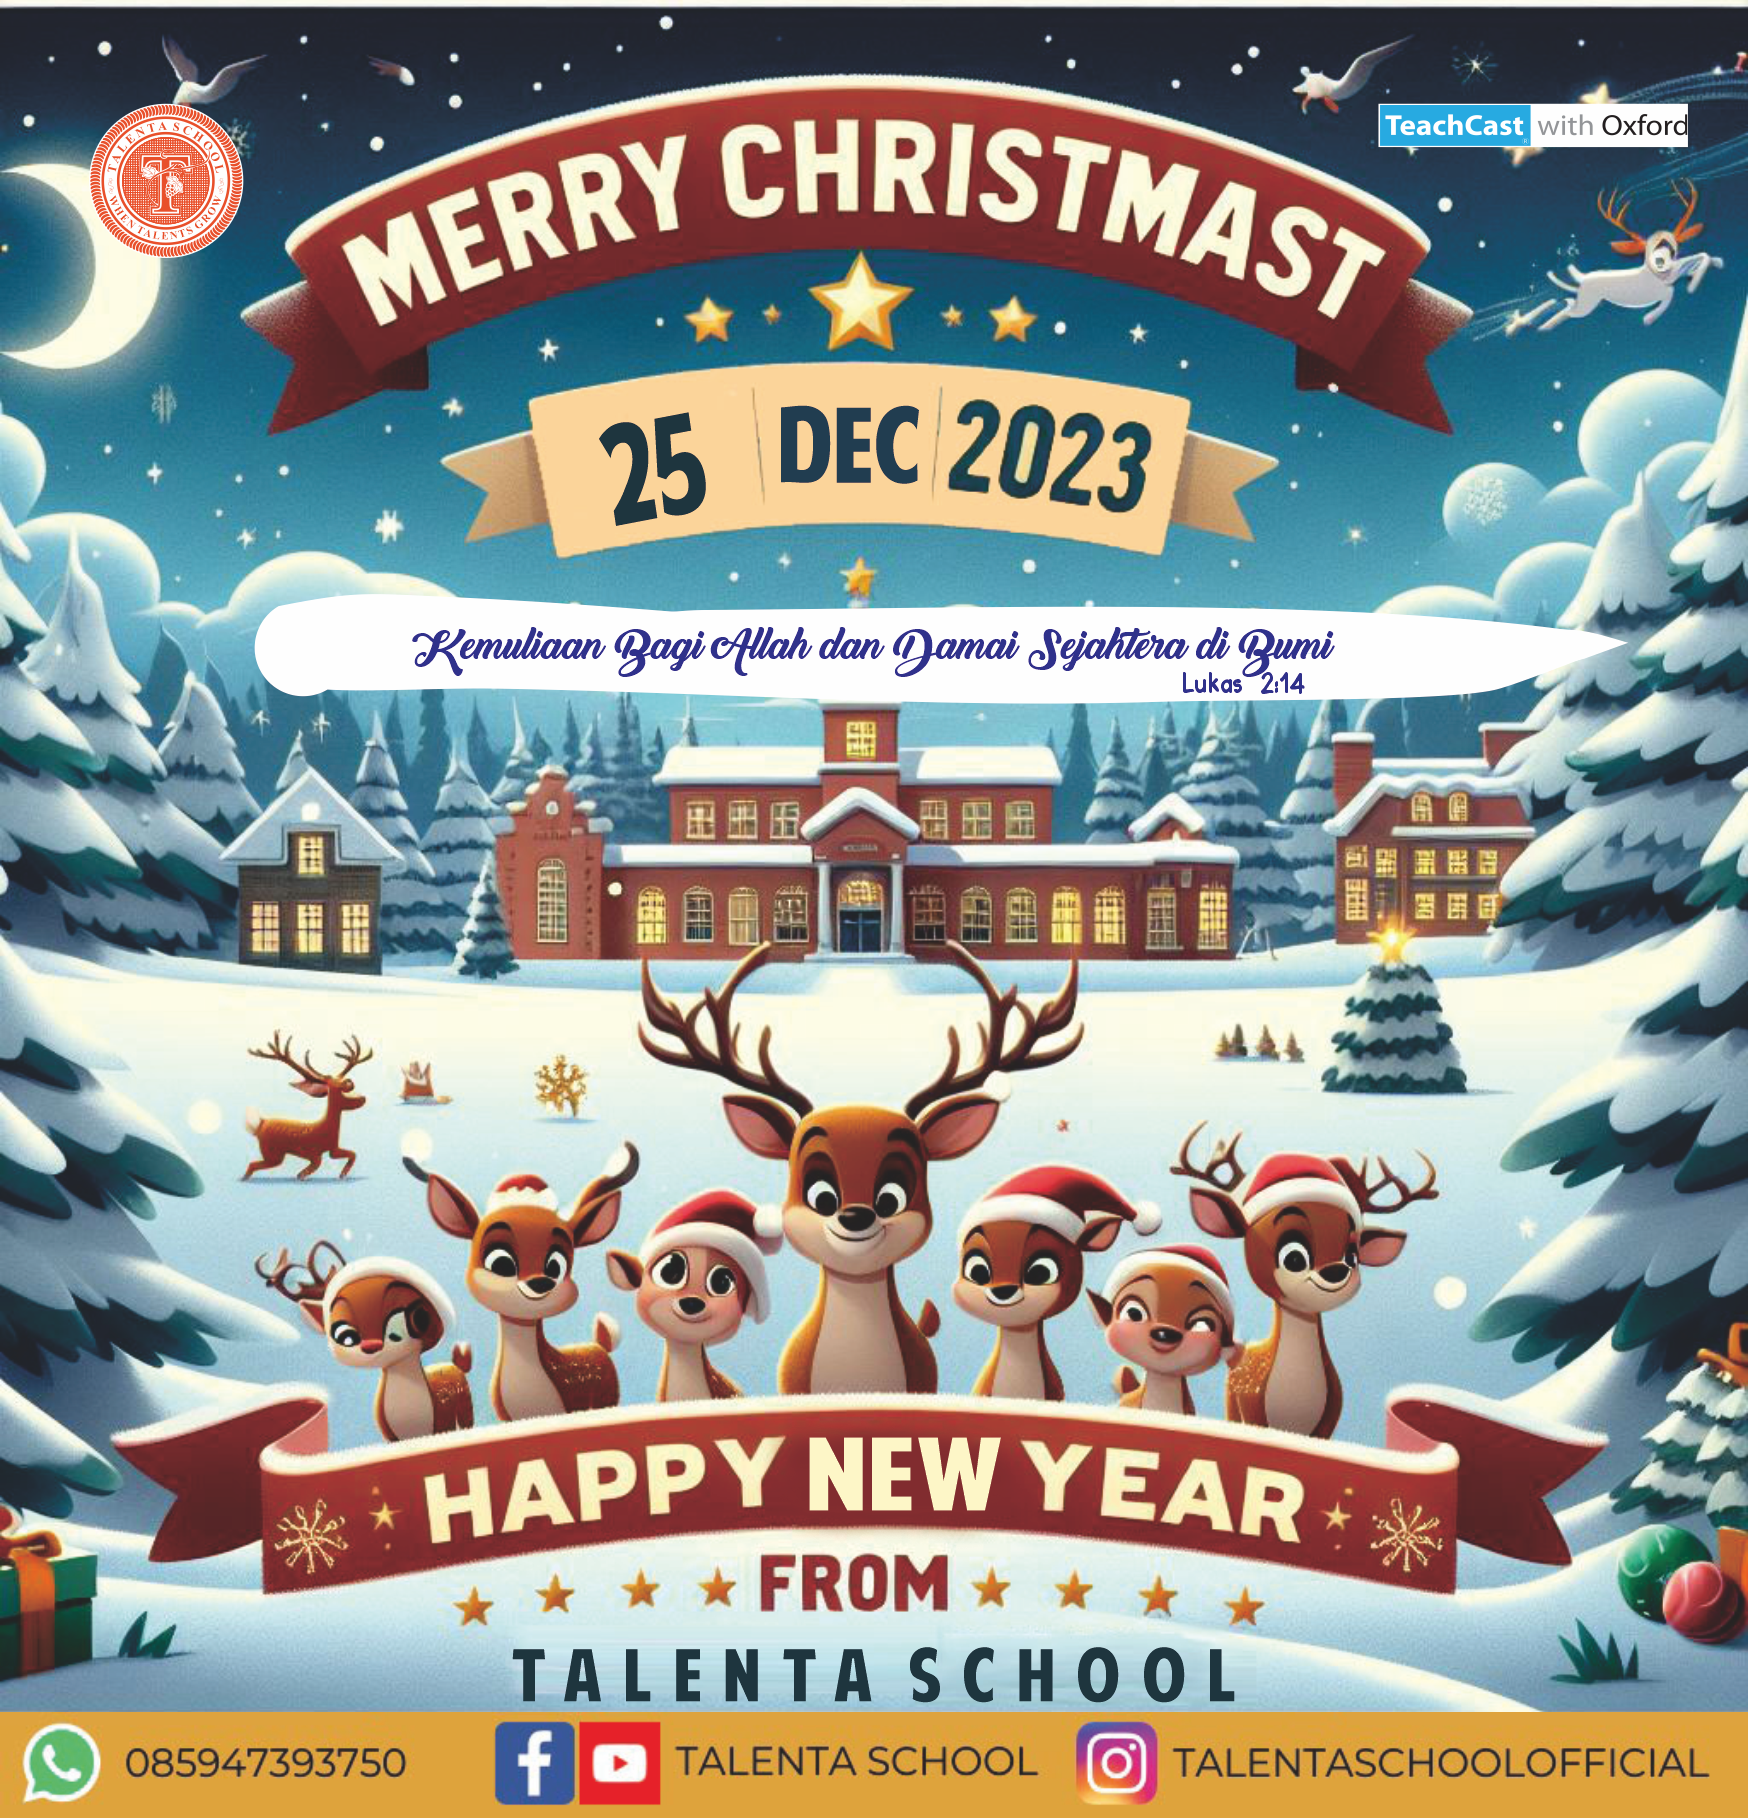 MERRY CHRISTMAS 2023 AND HAPPY NEW YEAR 2024